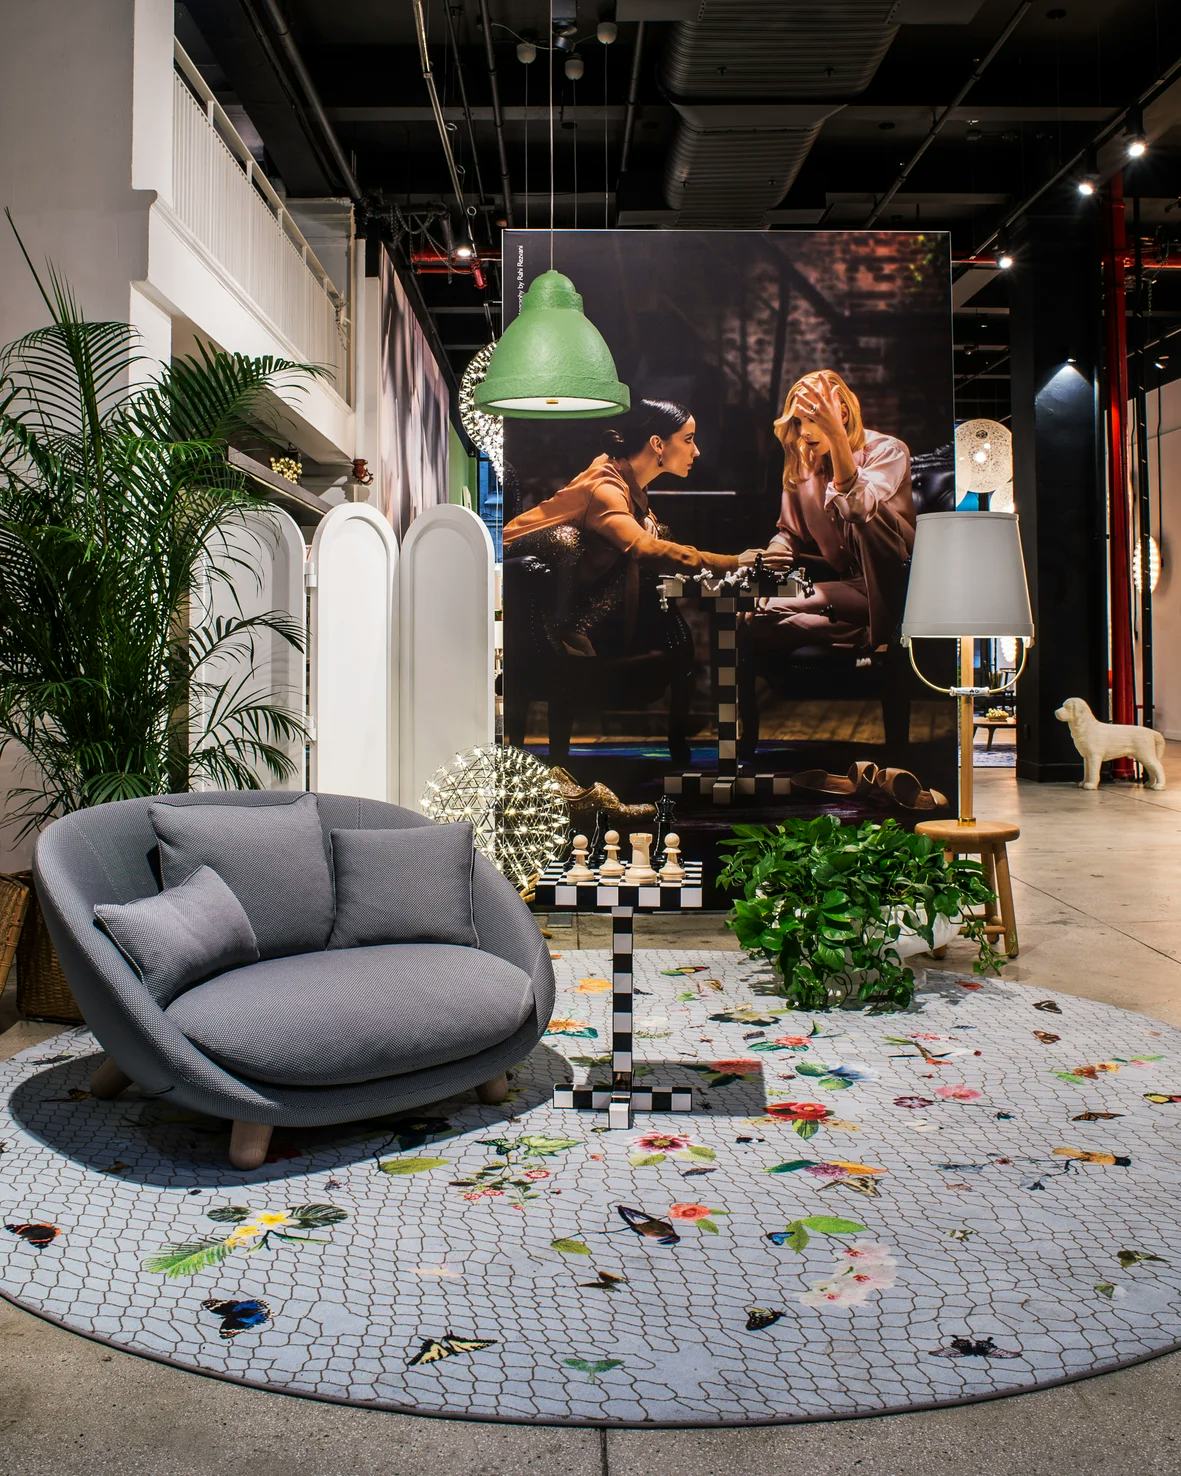 Interior of New York Showroom 2016 with Love Sofa, Chess Table and Moooi Carpet